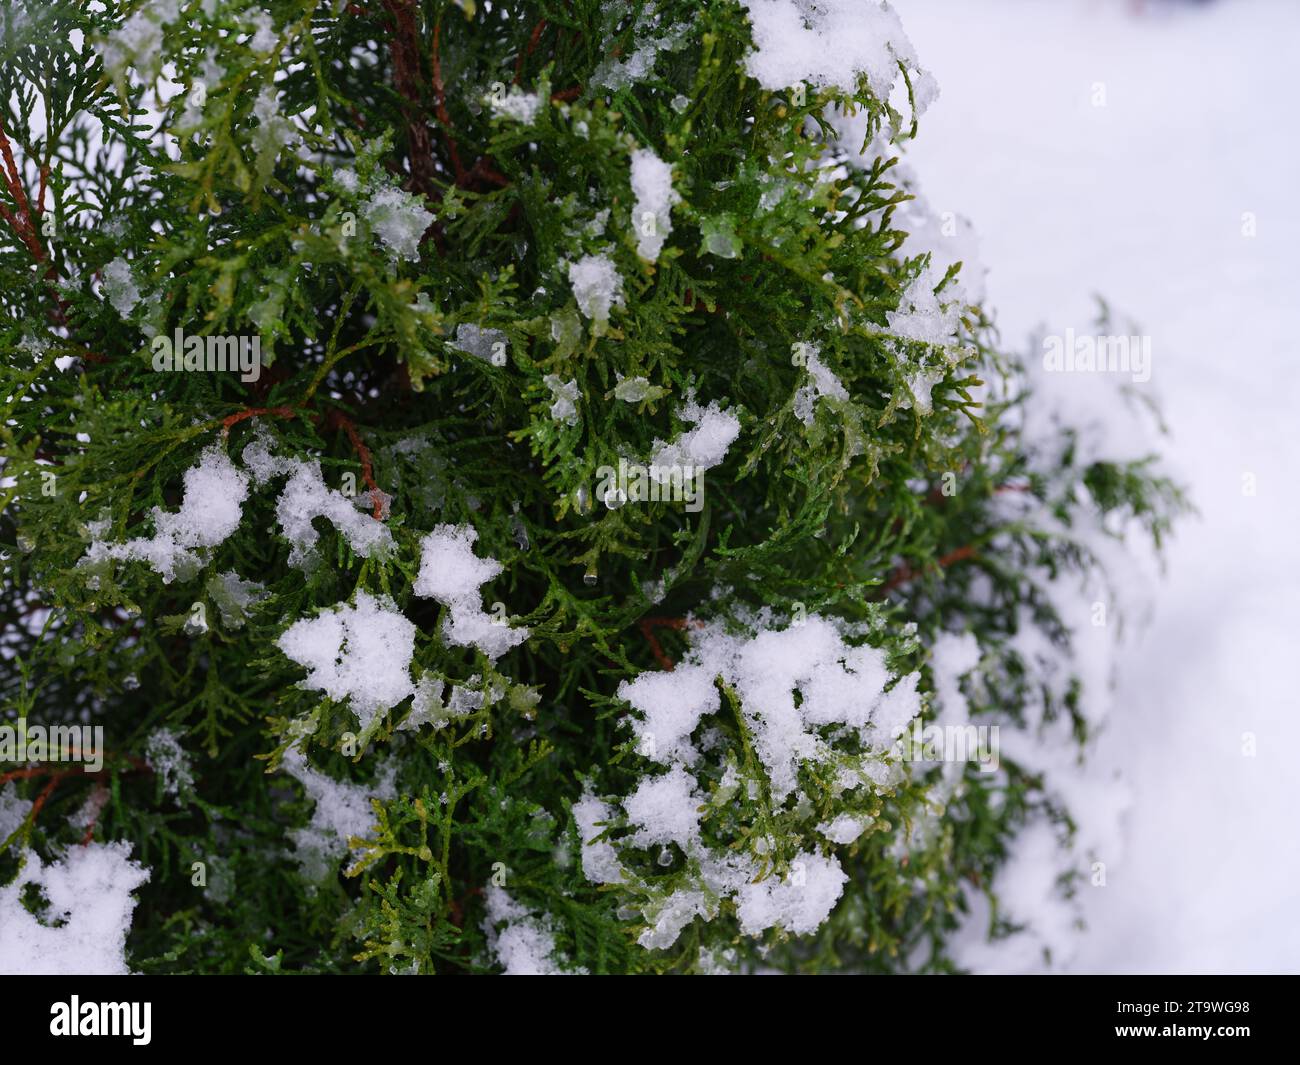 A close-up shot of a thuja tree covered snow. Stock Photo